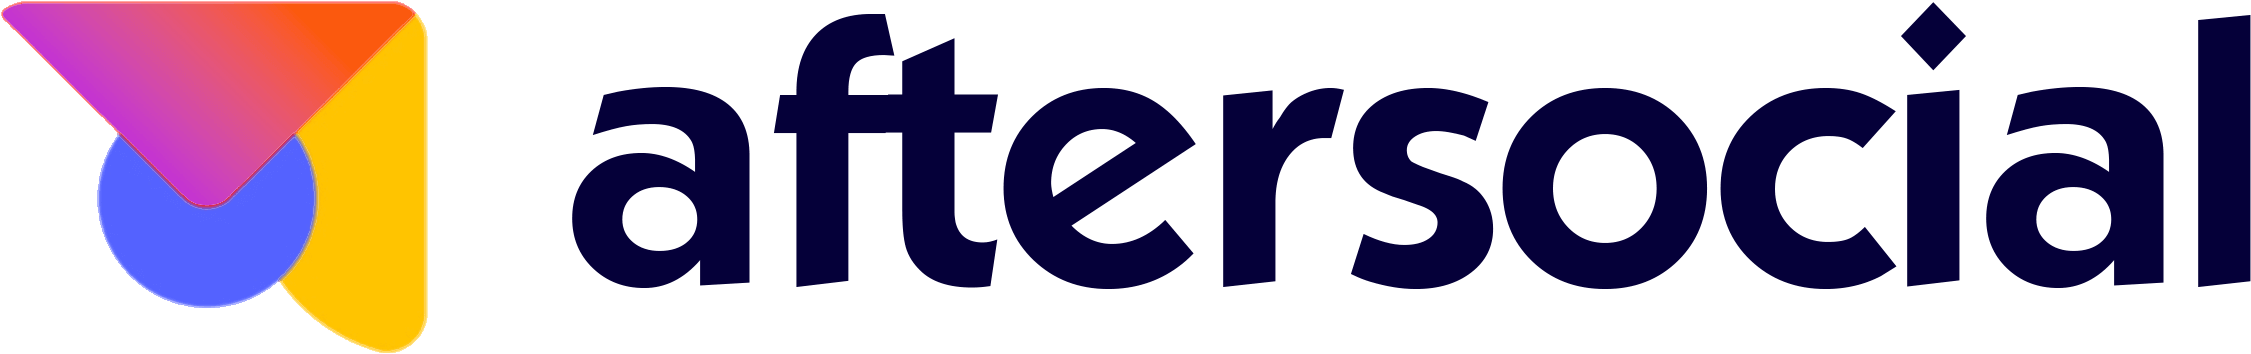 AfterSocial logo